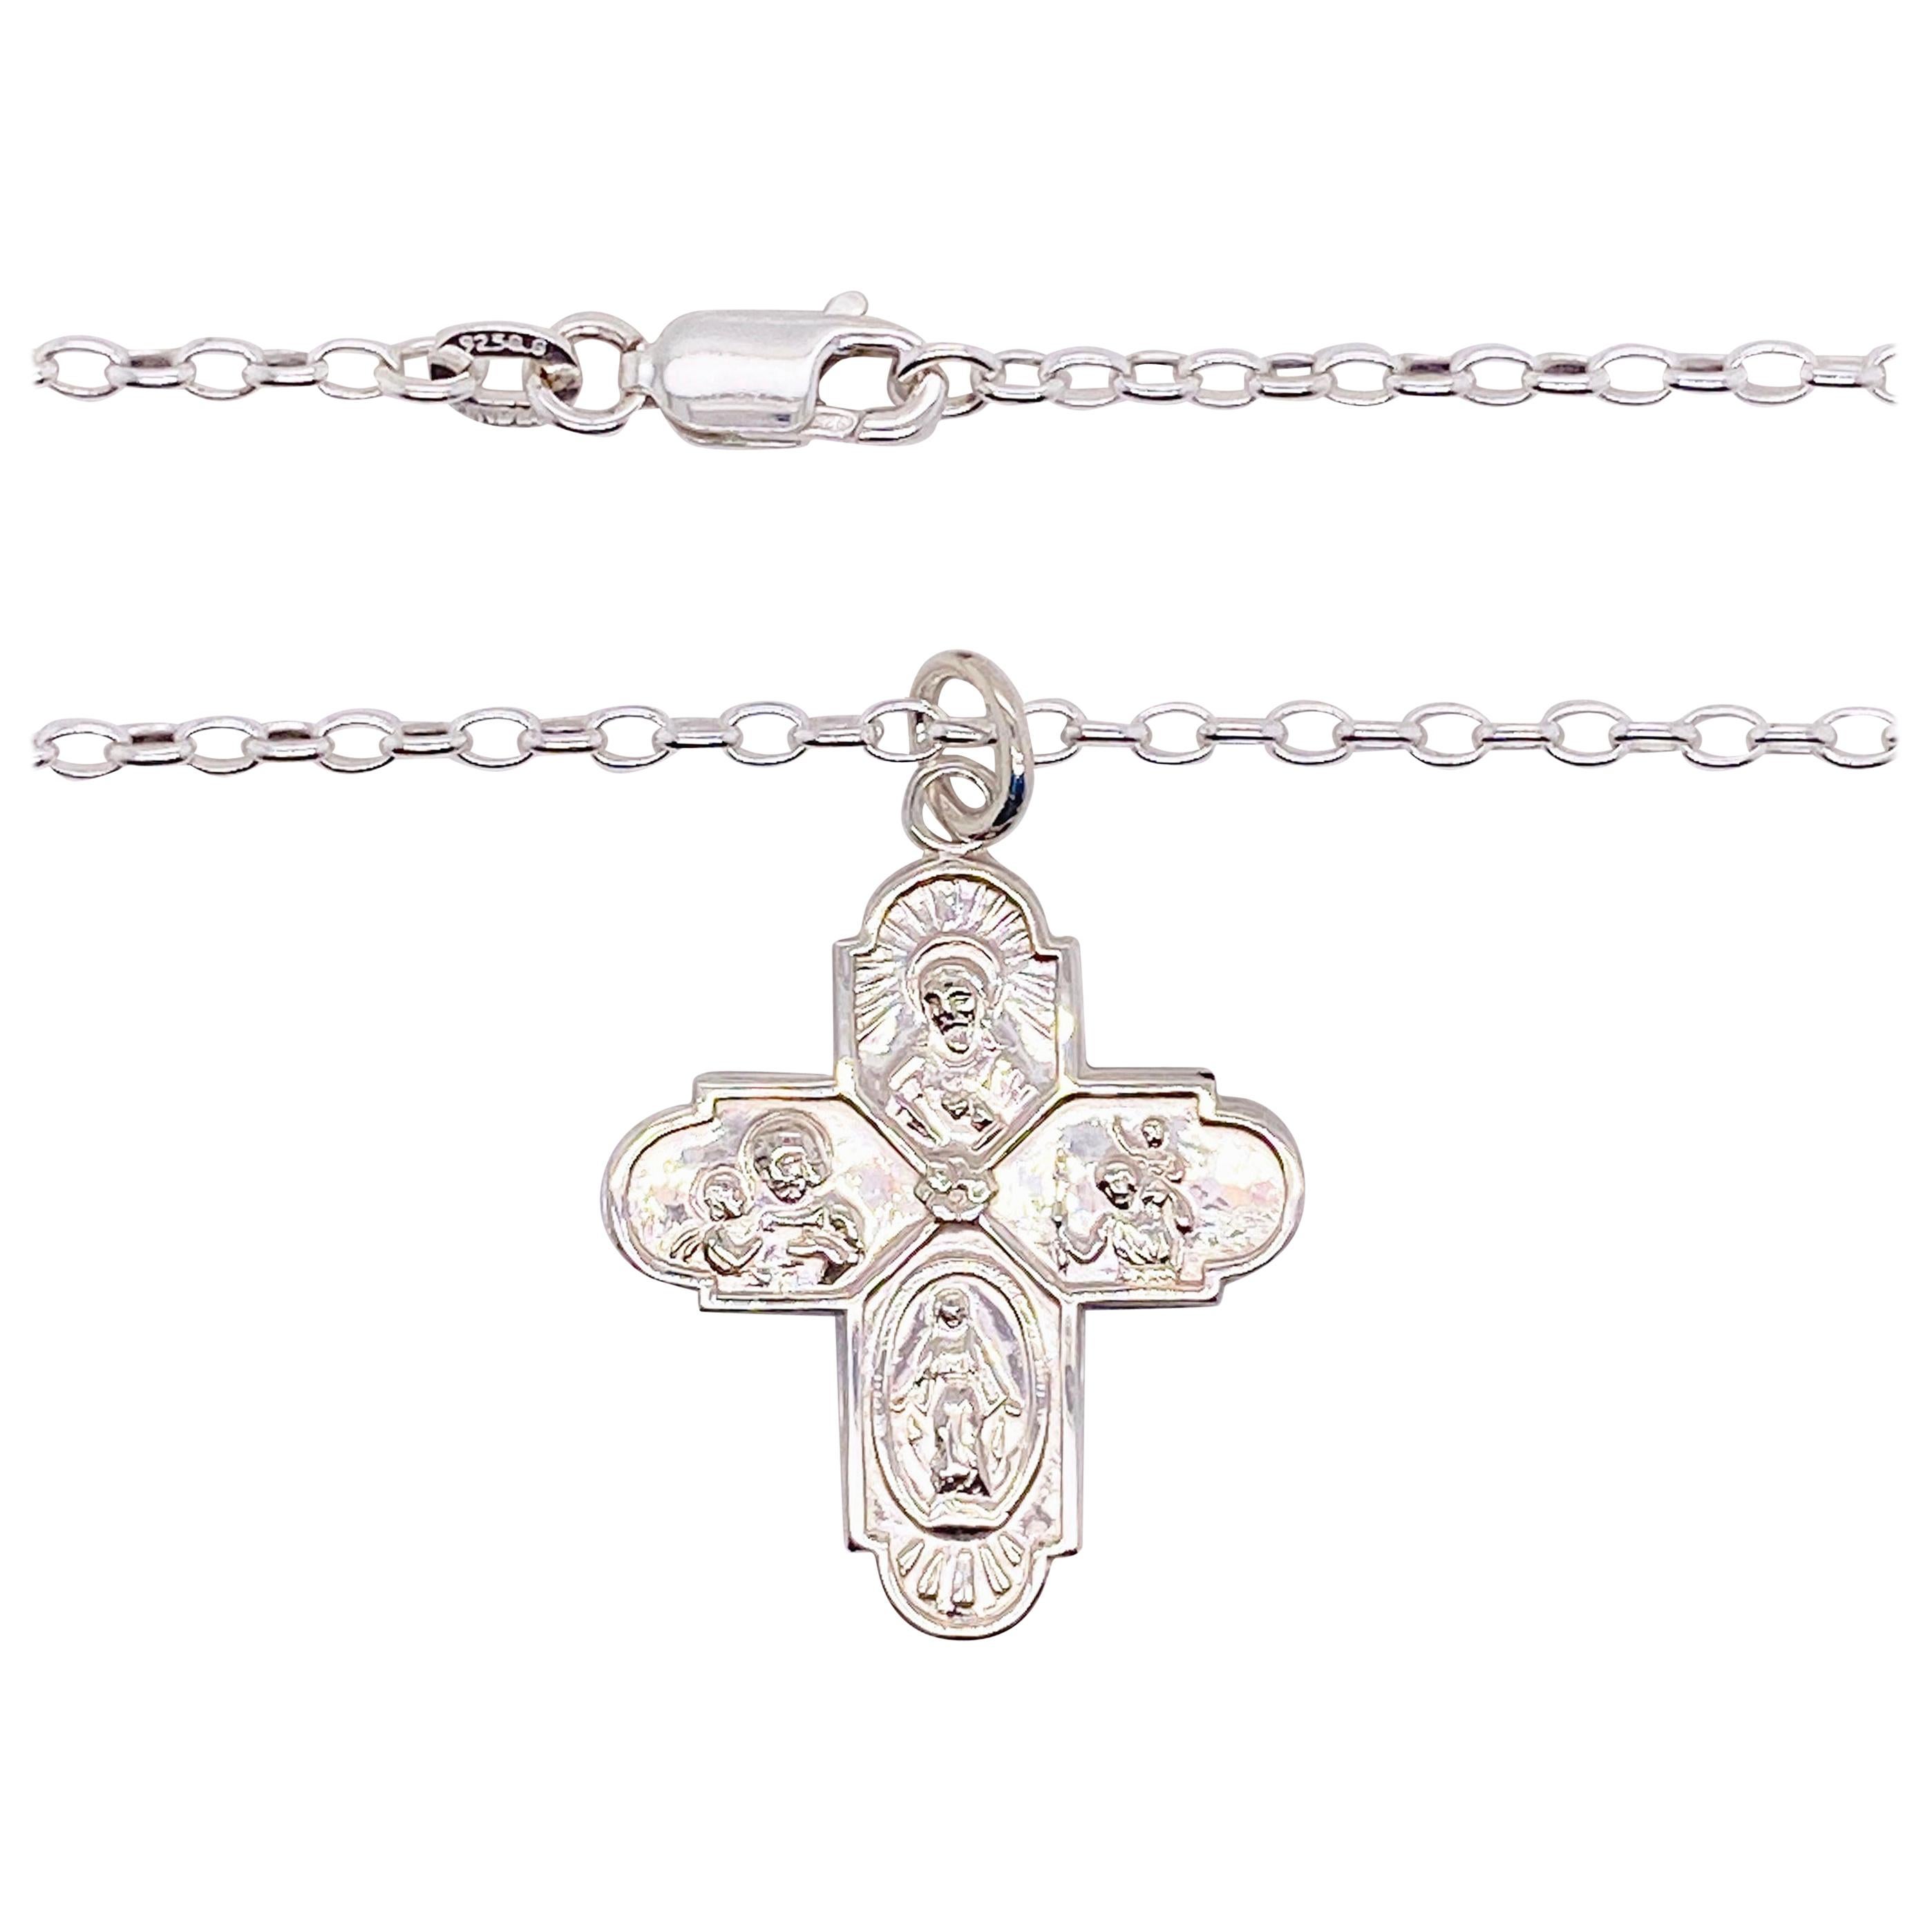 Miraculous Cross Necklace Sterling Silver Four Way Pendant Cross, Religious